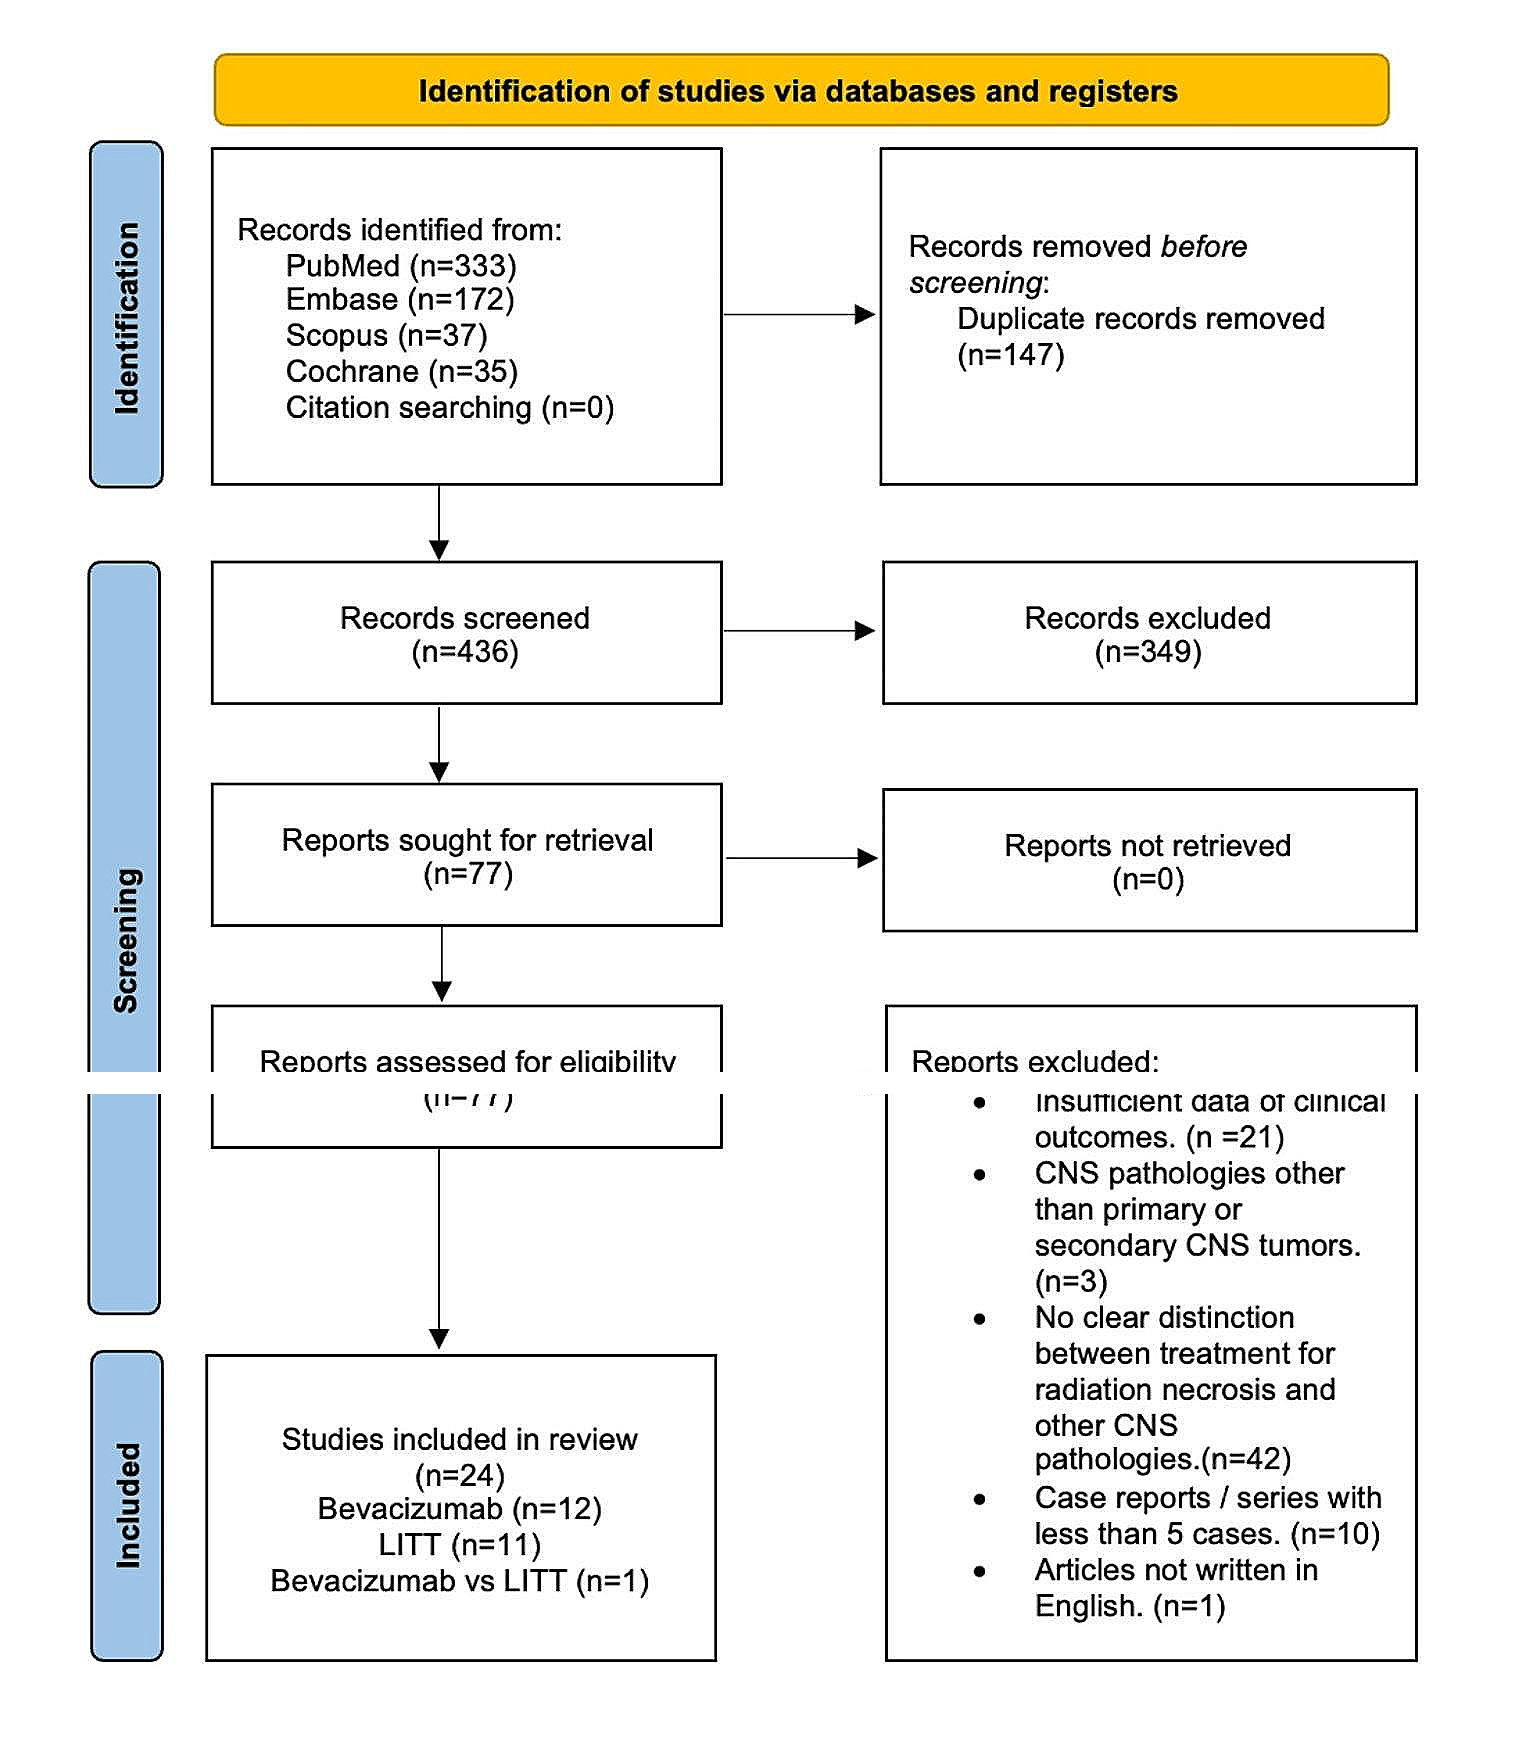 Comparative analysis of bevacizumab and LITT for treating radiation necrosis in previously radiated CNS neoplasms: a systematic review and meta-analysis